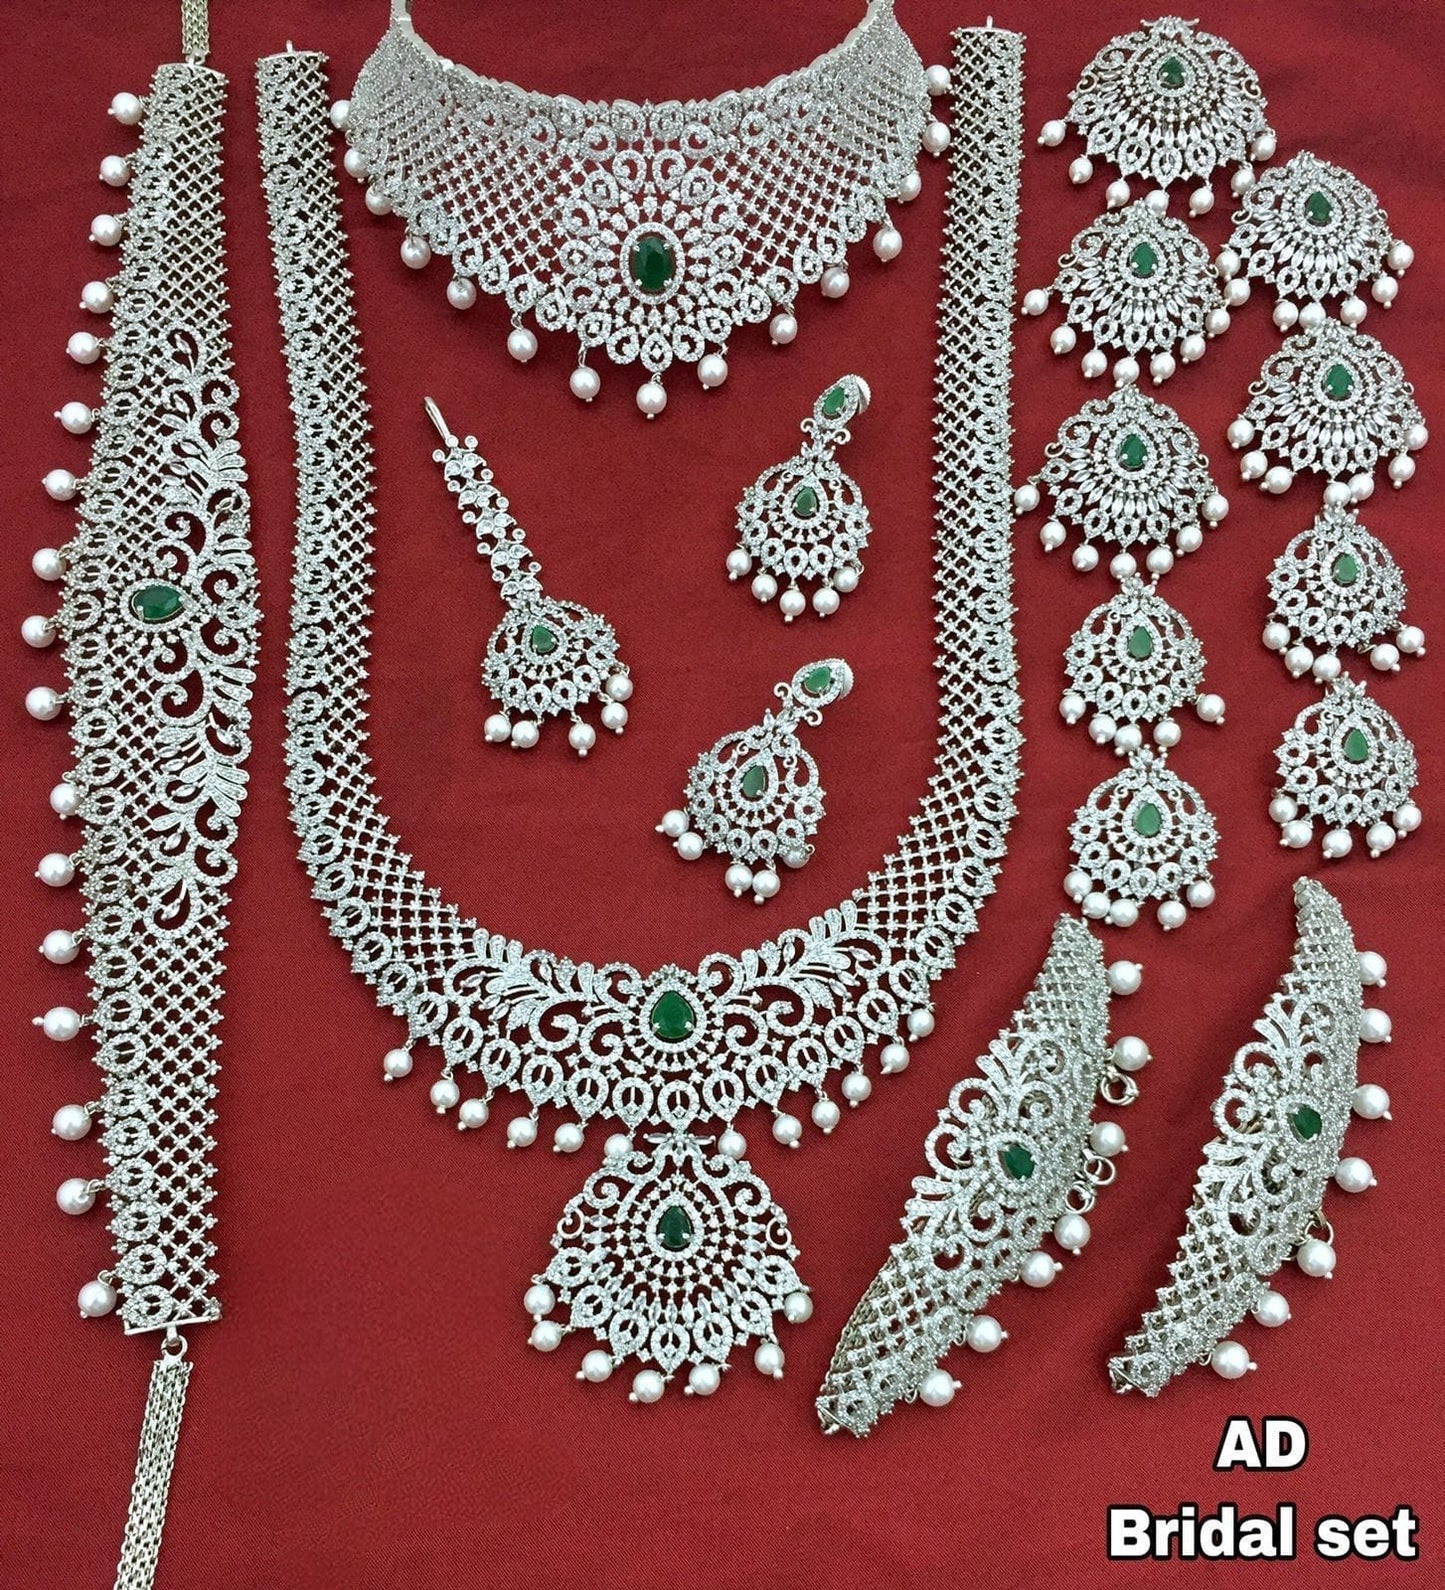 Exclusive South Indian AD Bridal Sets - SHJ1022